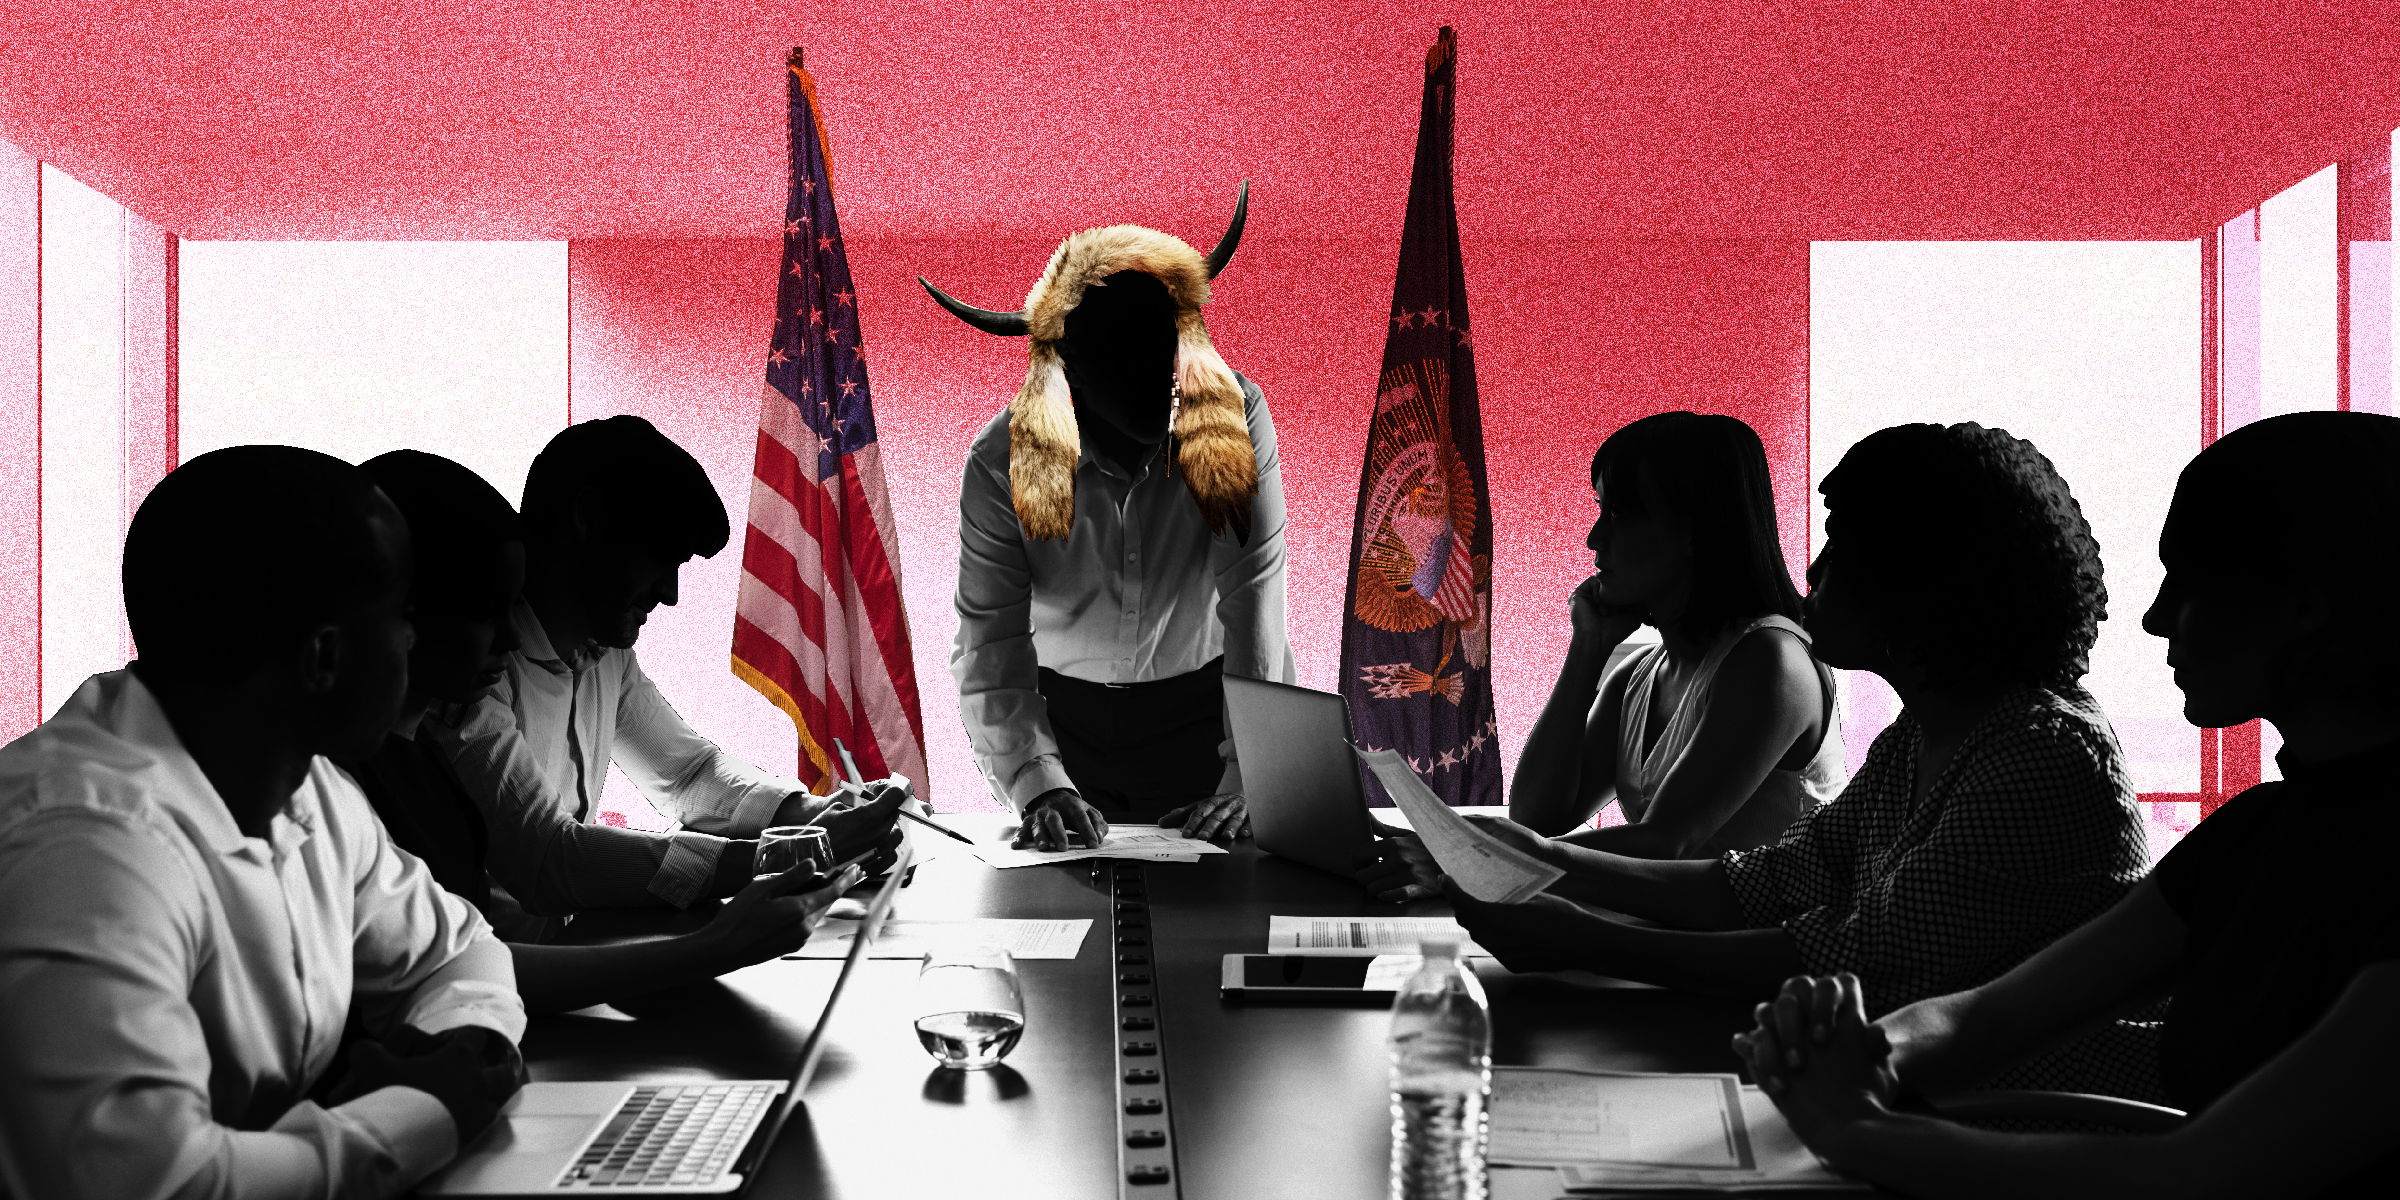 boardroom meeting with a leader in the center wearing Qanon Shaman horns against a red background with American flags